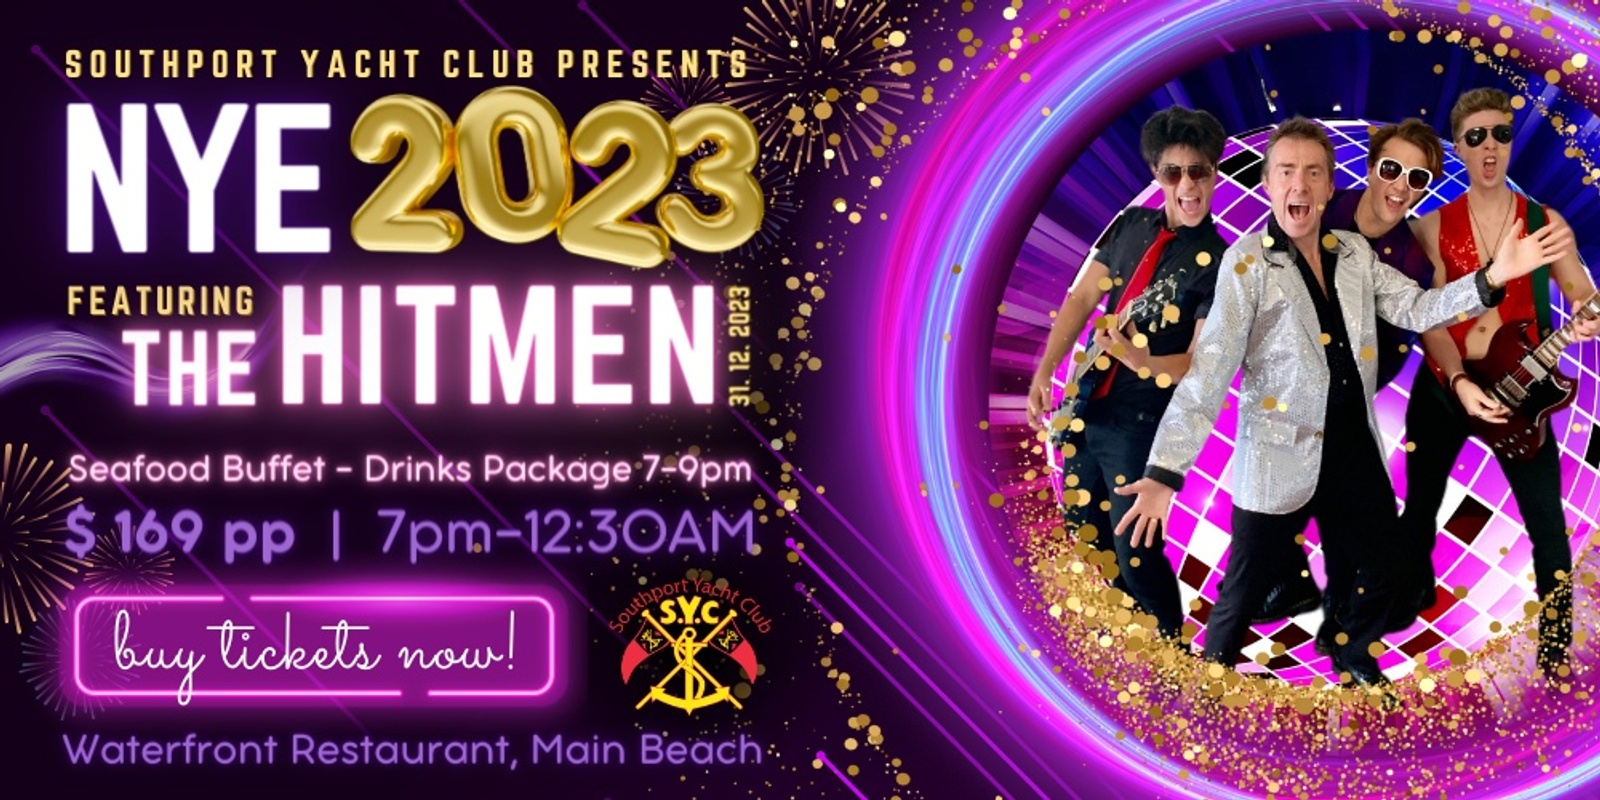 Banner image for New Years Eve - THE HITMEN BAND 2023 - Waterfront Restaurant